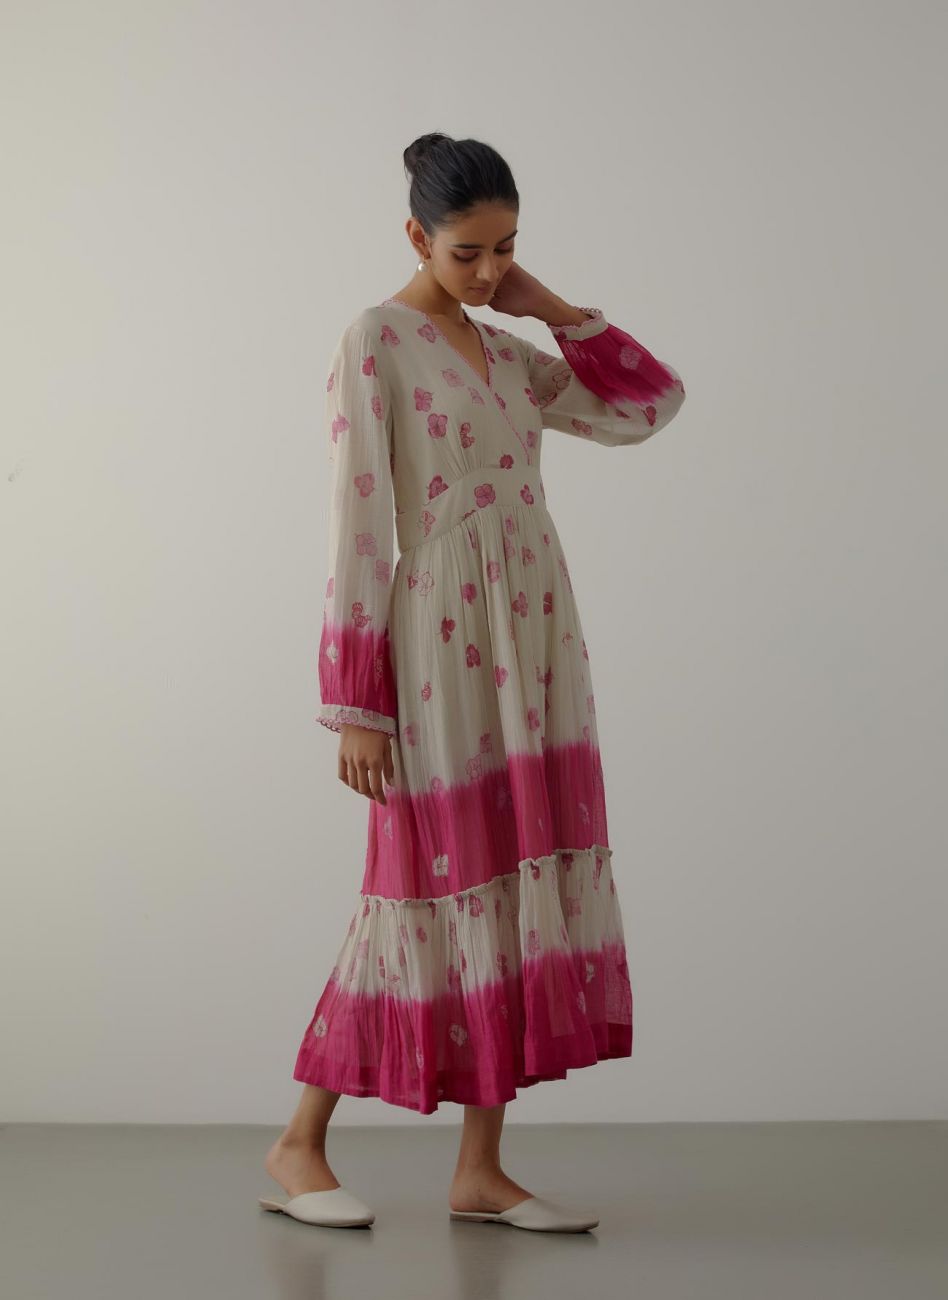 Pink Summer Petal Dress - Indian Clothing in Denver, CO, Aurora, CO, Boulder, CO, Fort Collins, CO, Colorado Springs, CO, Parker, CO, Highlands Ranch, CO, Cherry Creek, CO, Centennial, CO, and Longmont, CO. Nationwide shipping USA - India Fashion X